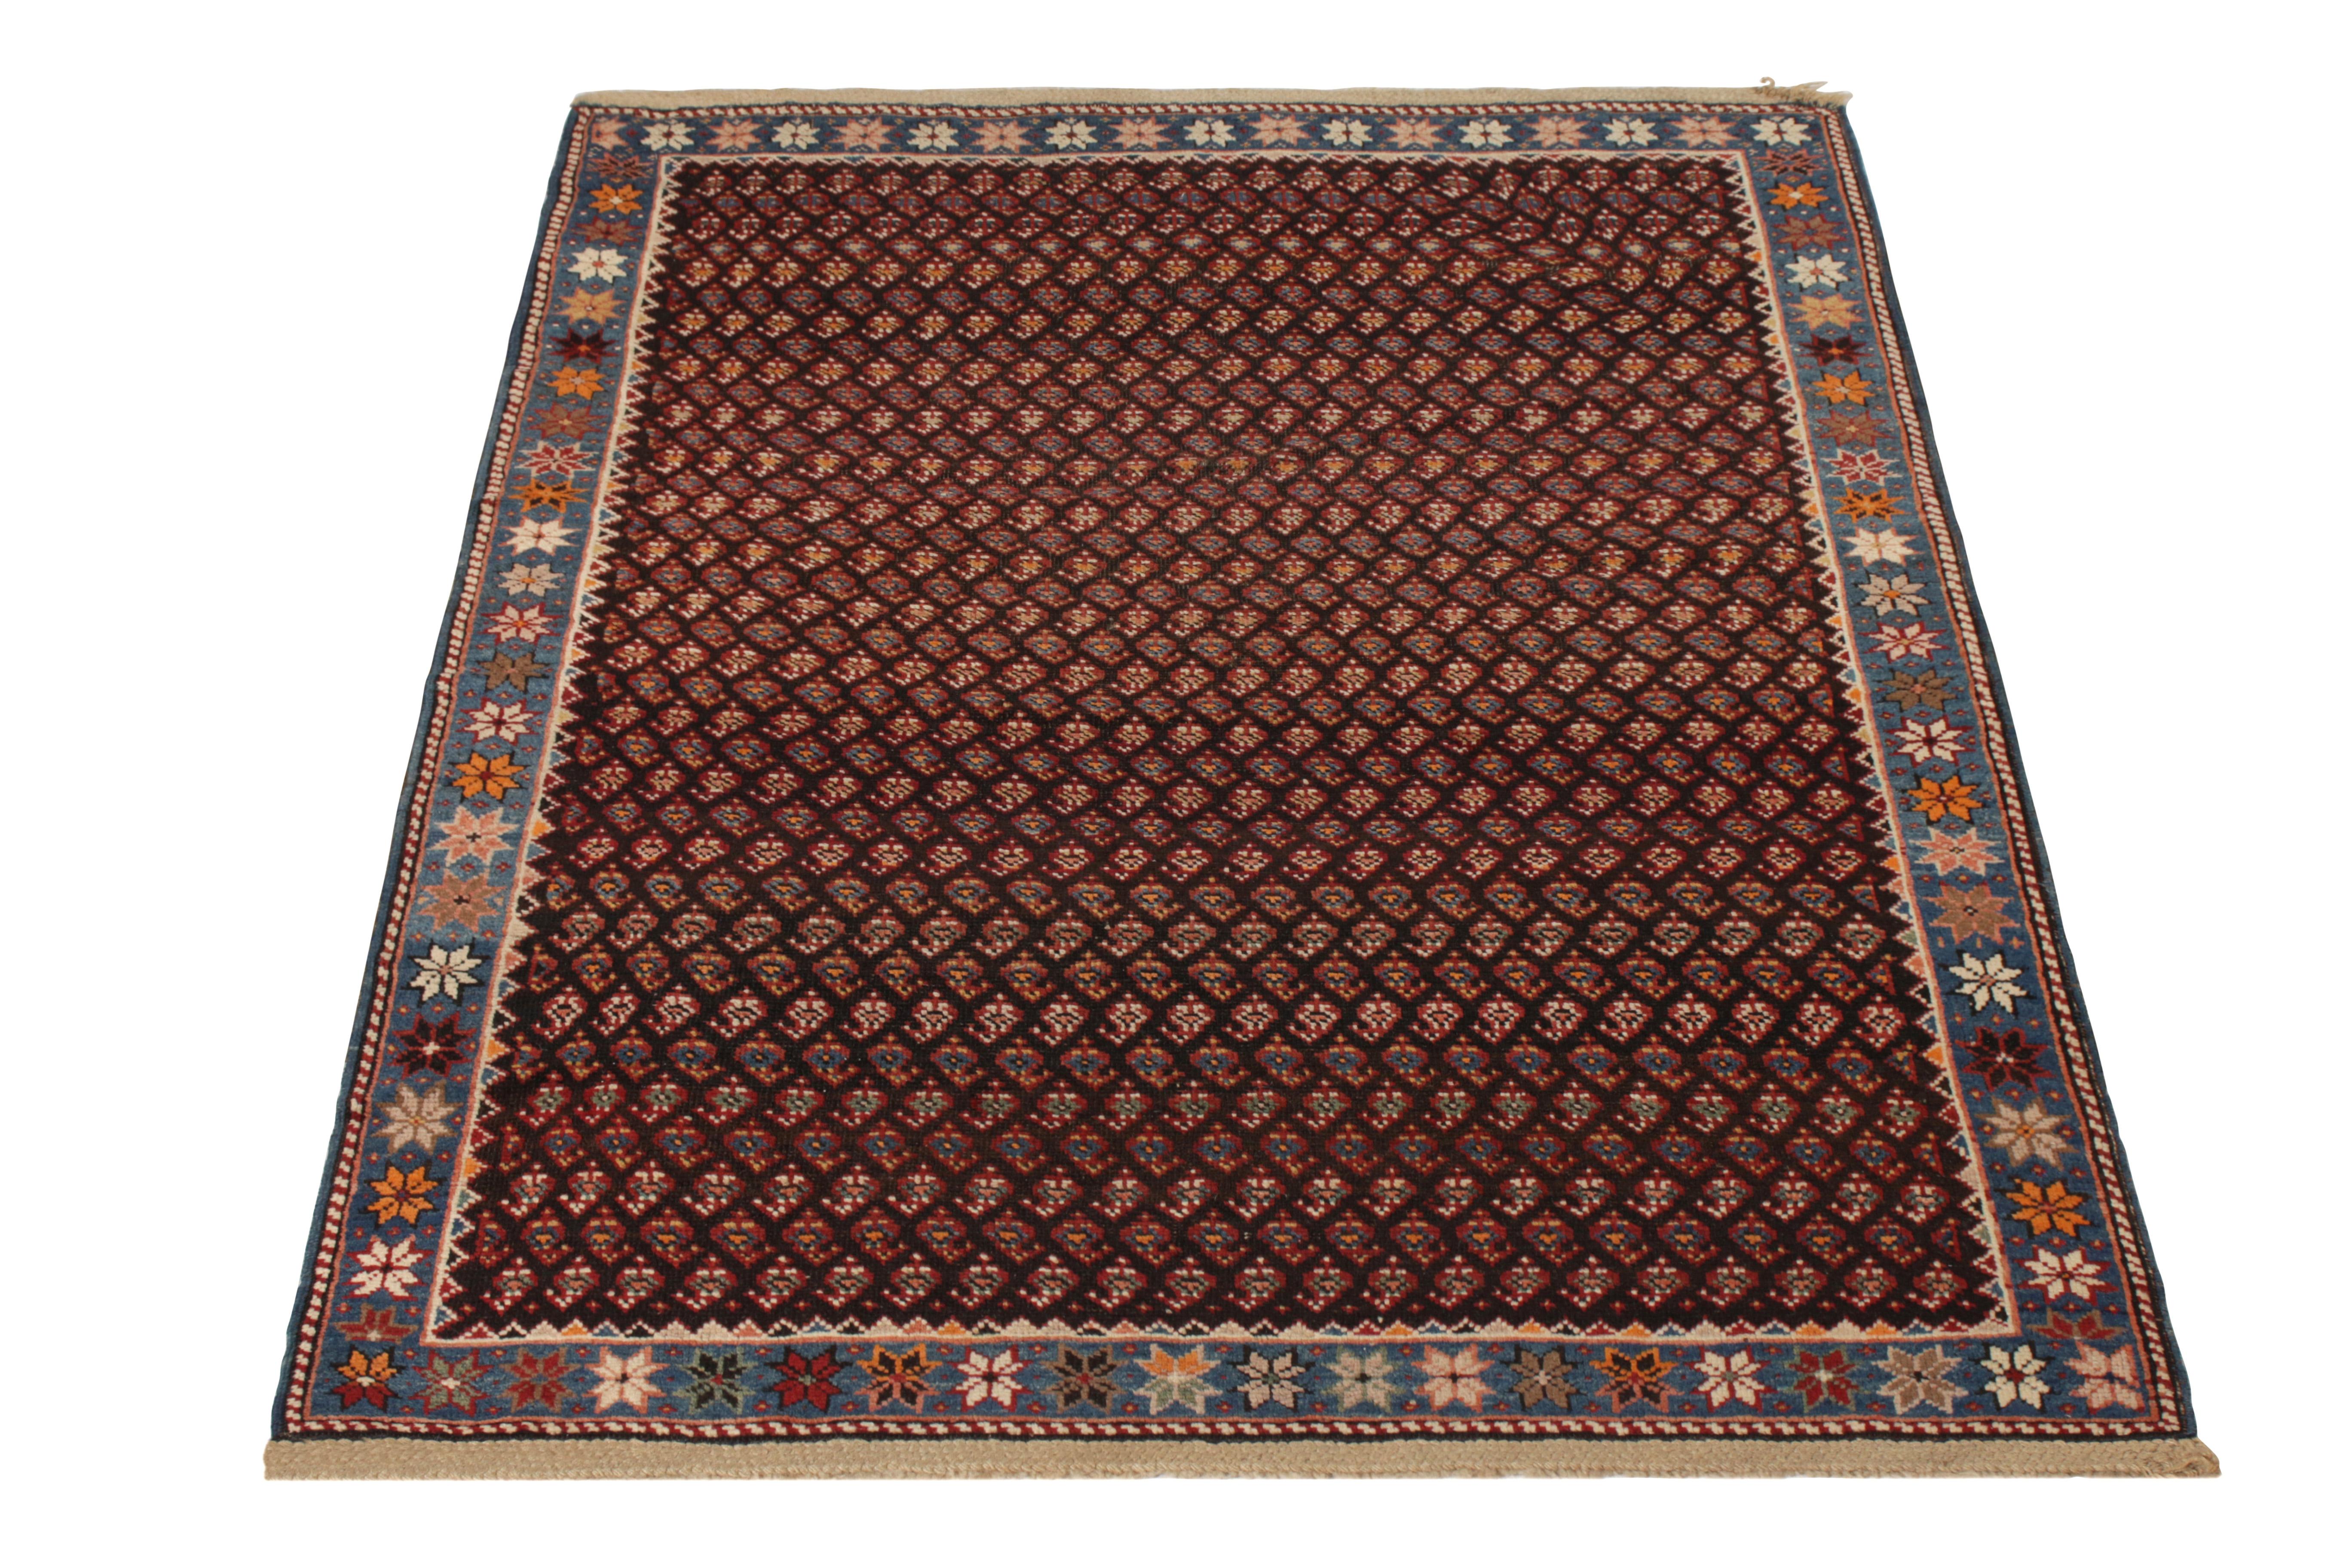 Hand-knotted in wool originating from Russia circa 1910-1920, this antique Russian rug connotes a transitional Kuba rug design in notable textural, intricate pile approach with a rare black background, seldom seen in Kuba rugs like this 4x5 and its